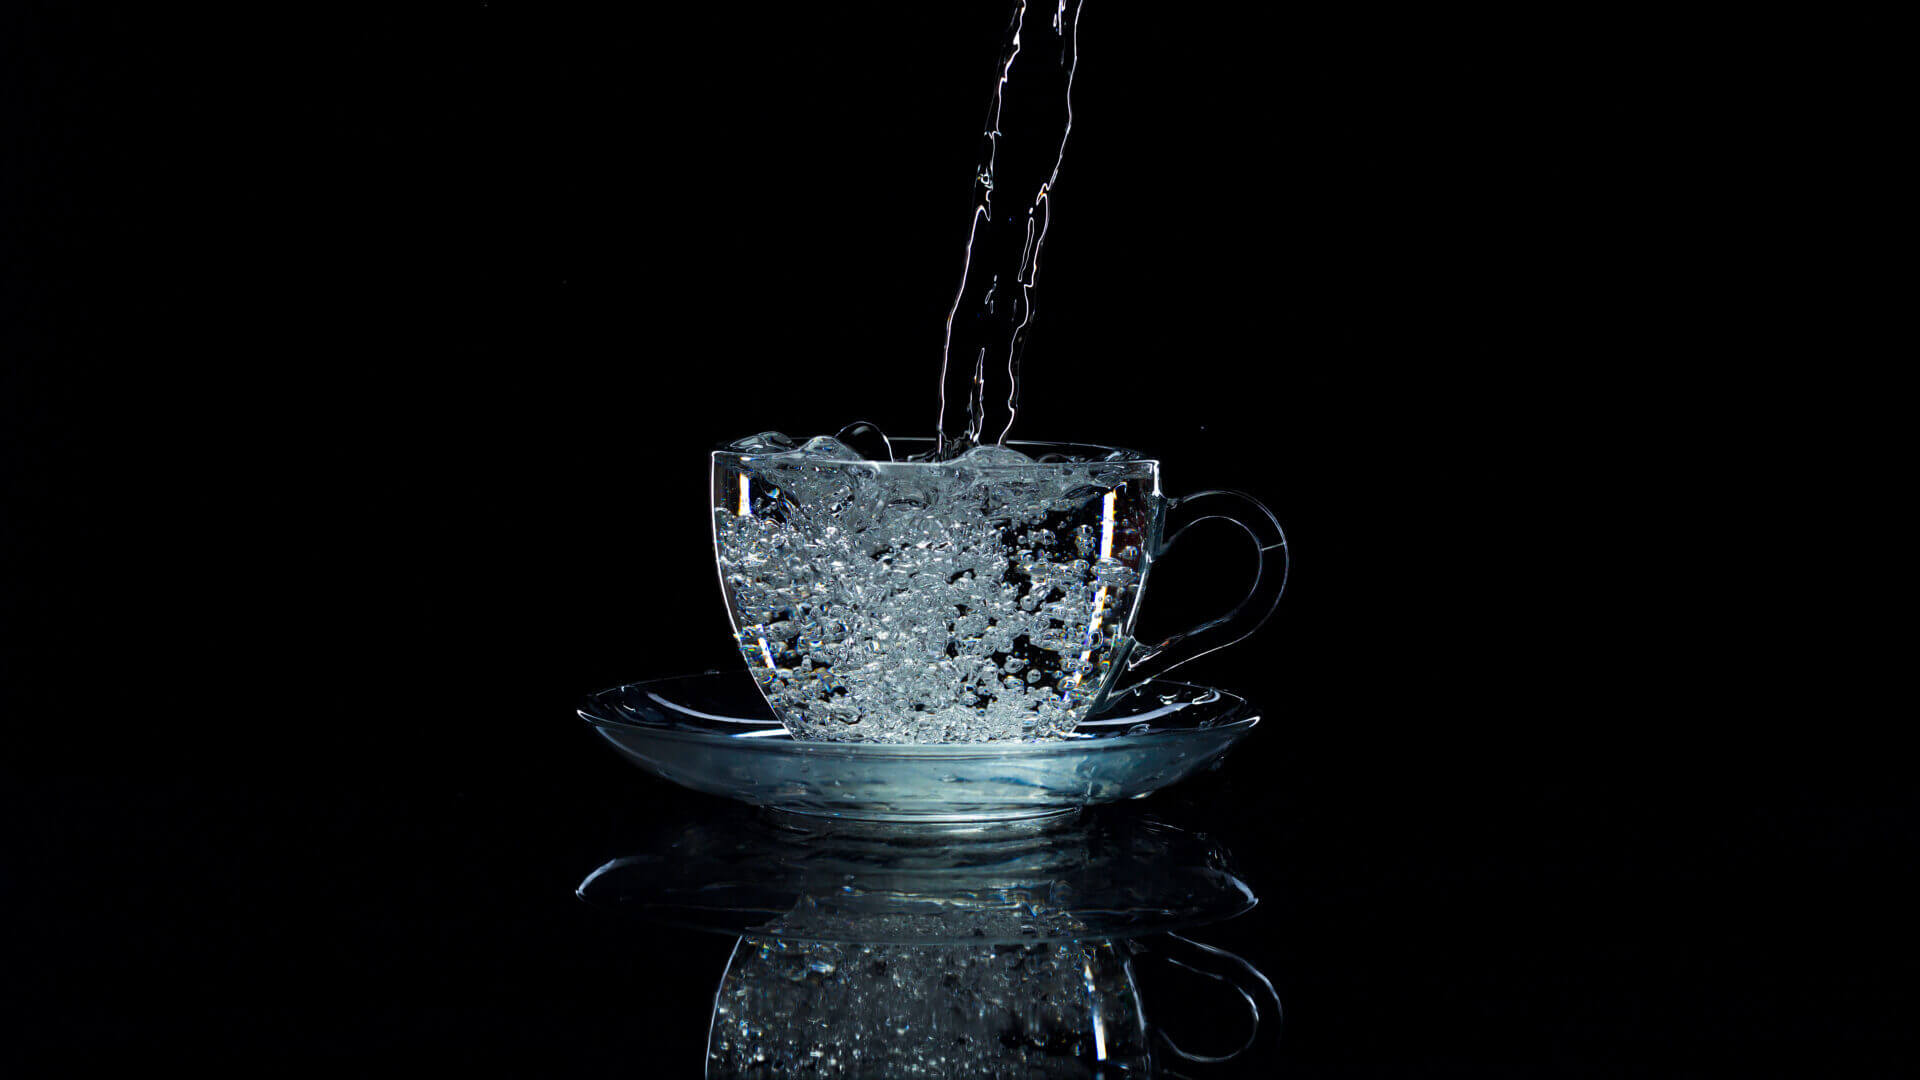 water pours into the cup on a black background st 2023 11 27 05 23 29 utc edited